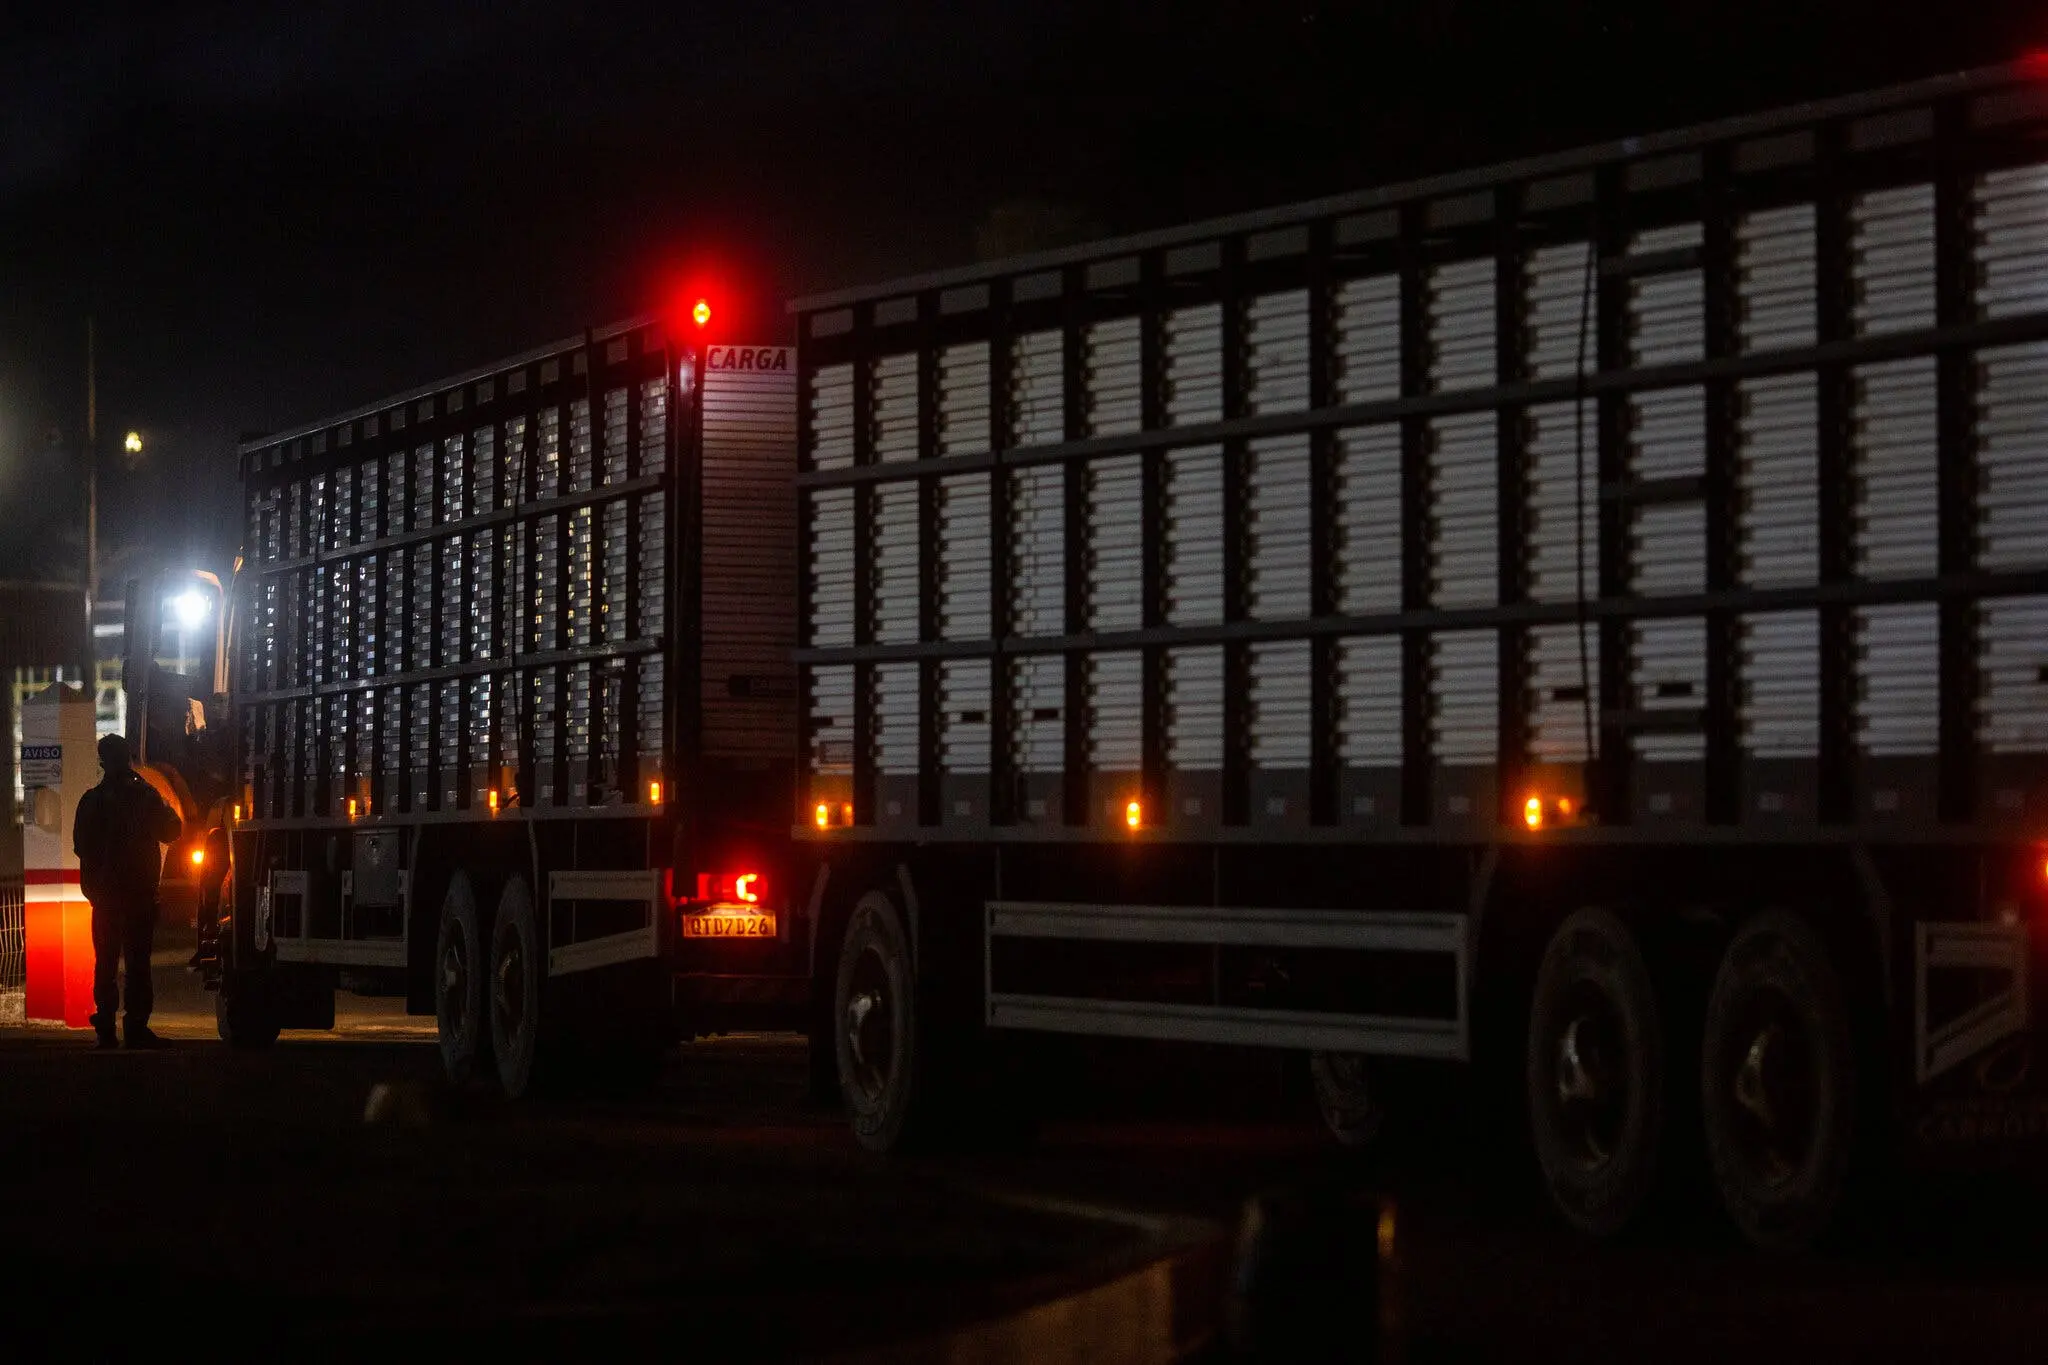 Cattle trucks arrived at a Marfrig slaughterhouse